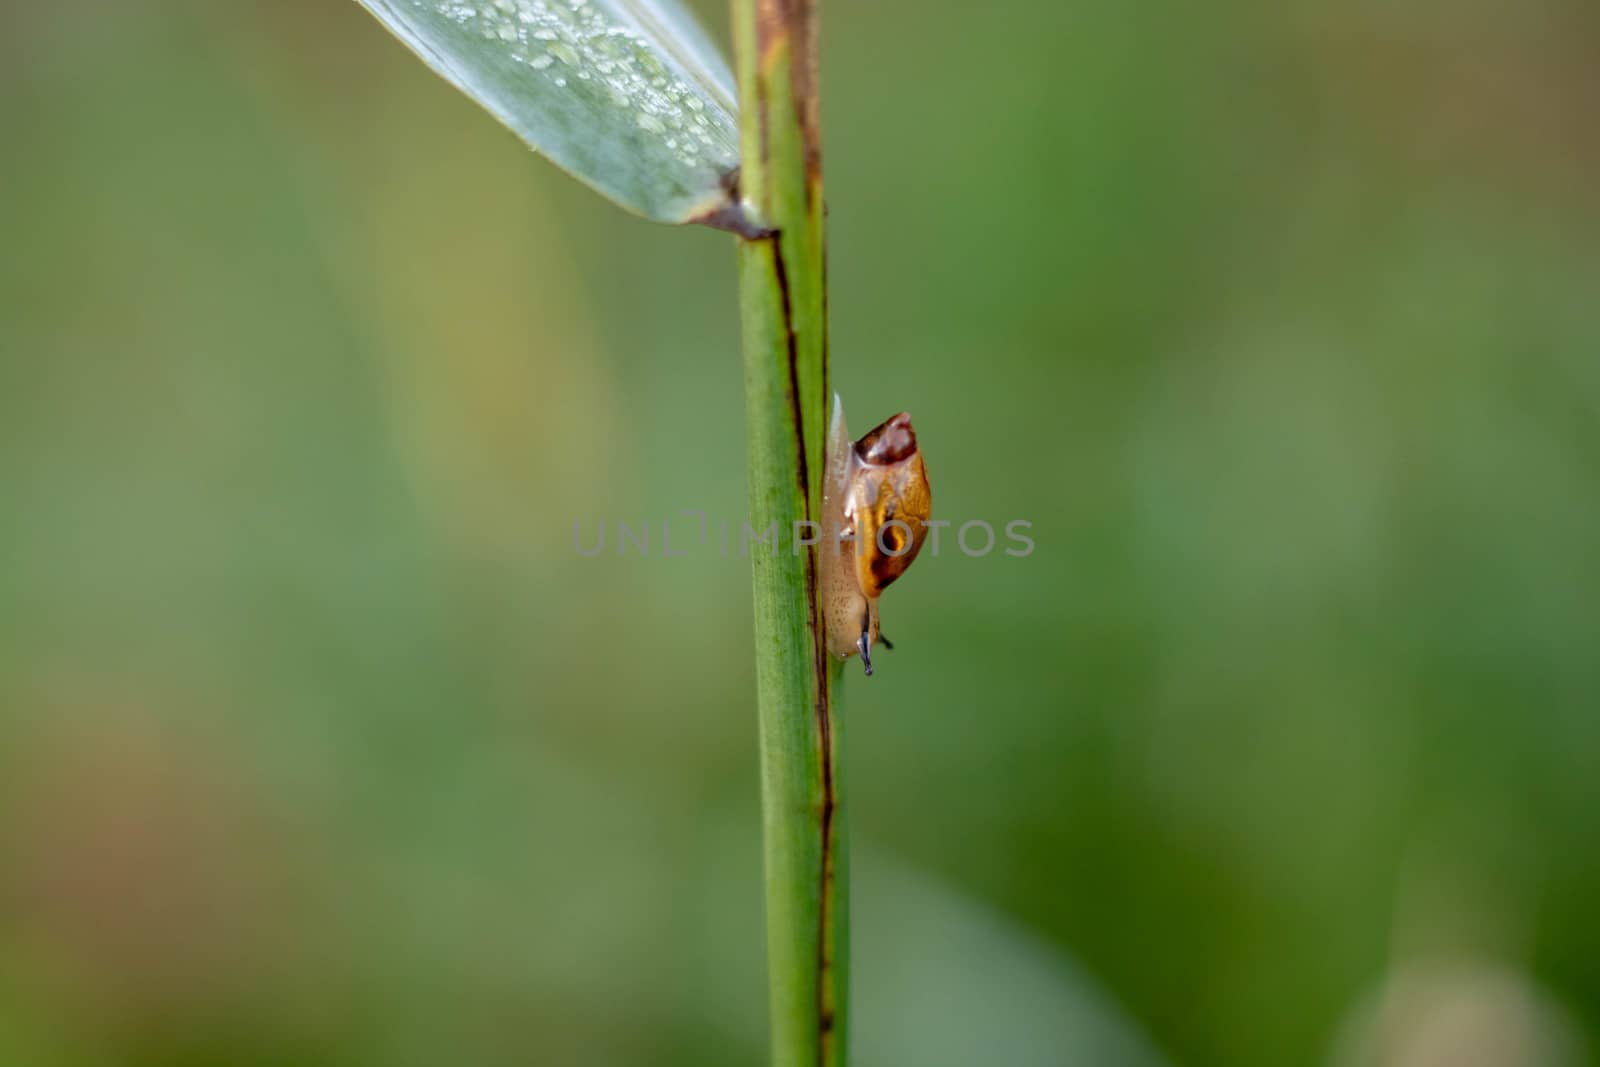 snail shell sitting on green grass, soft selective focus by lapushka62